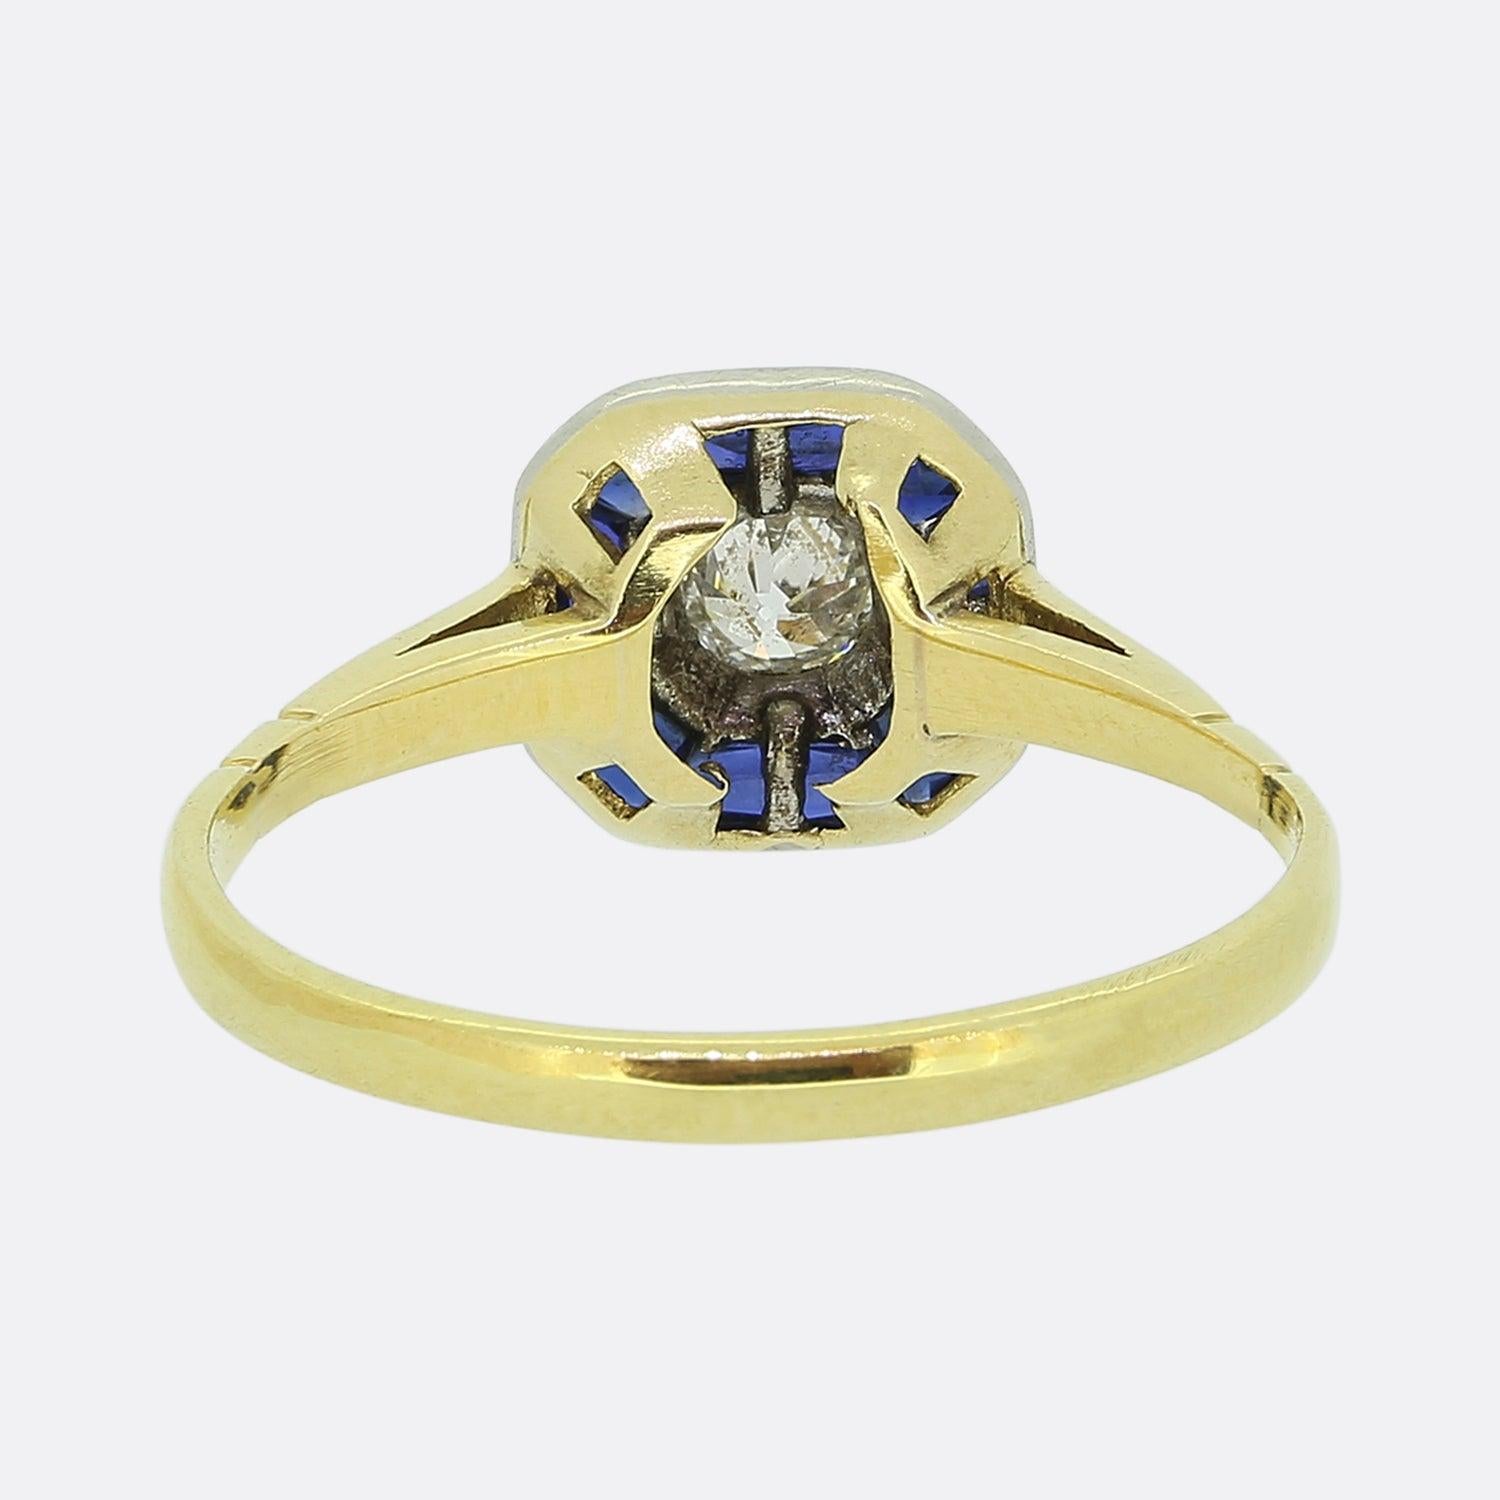 Old European Cut Art Deco 0.20 Carat Old Cut Diamond and Sapphire Ring For Sale